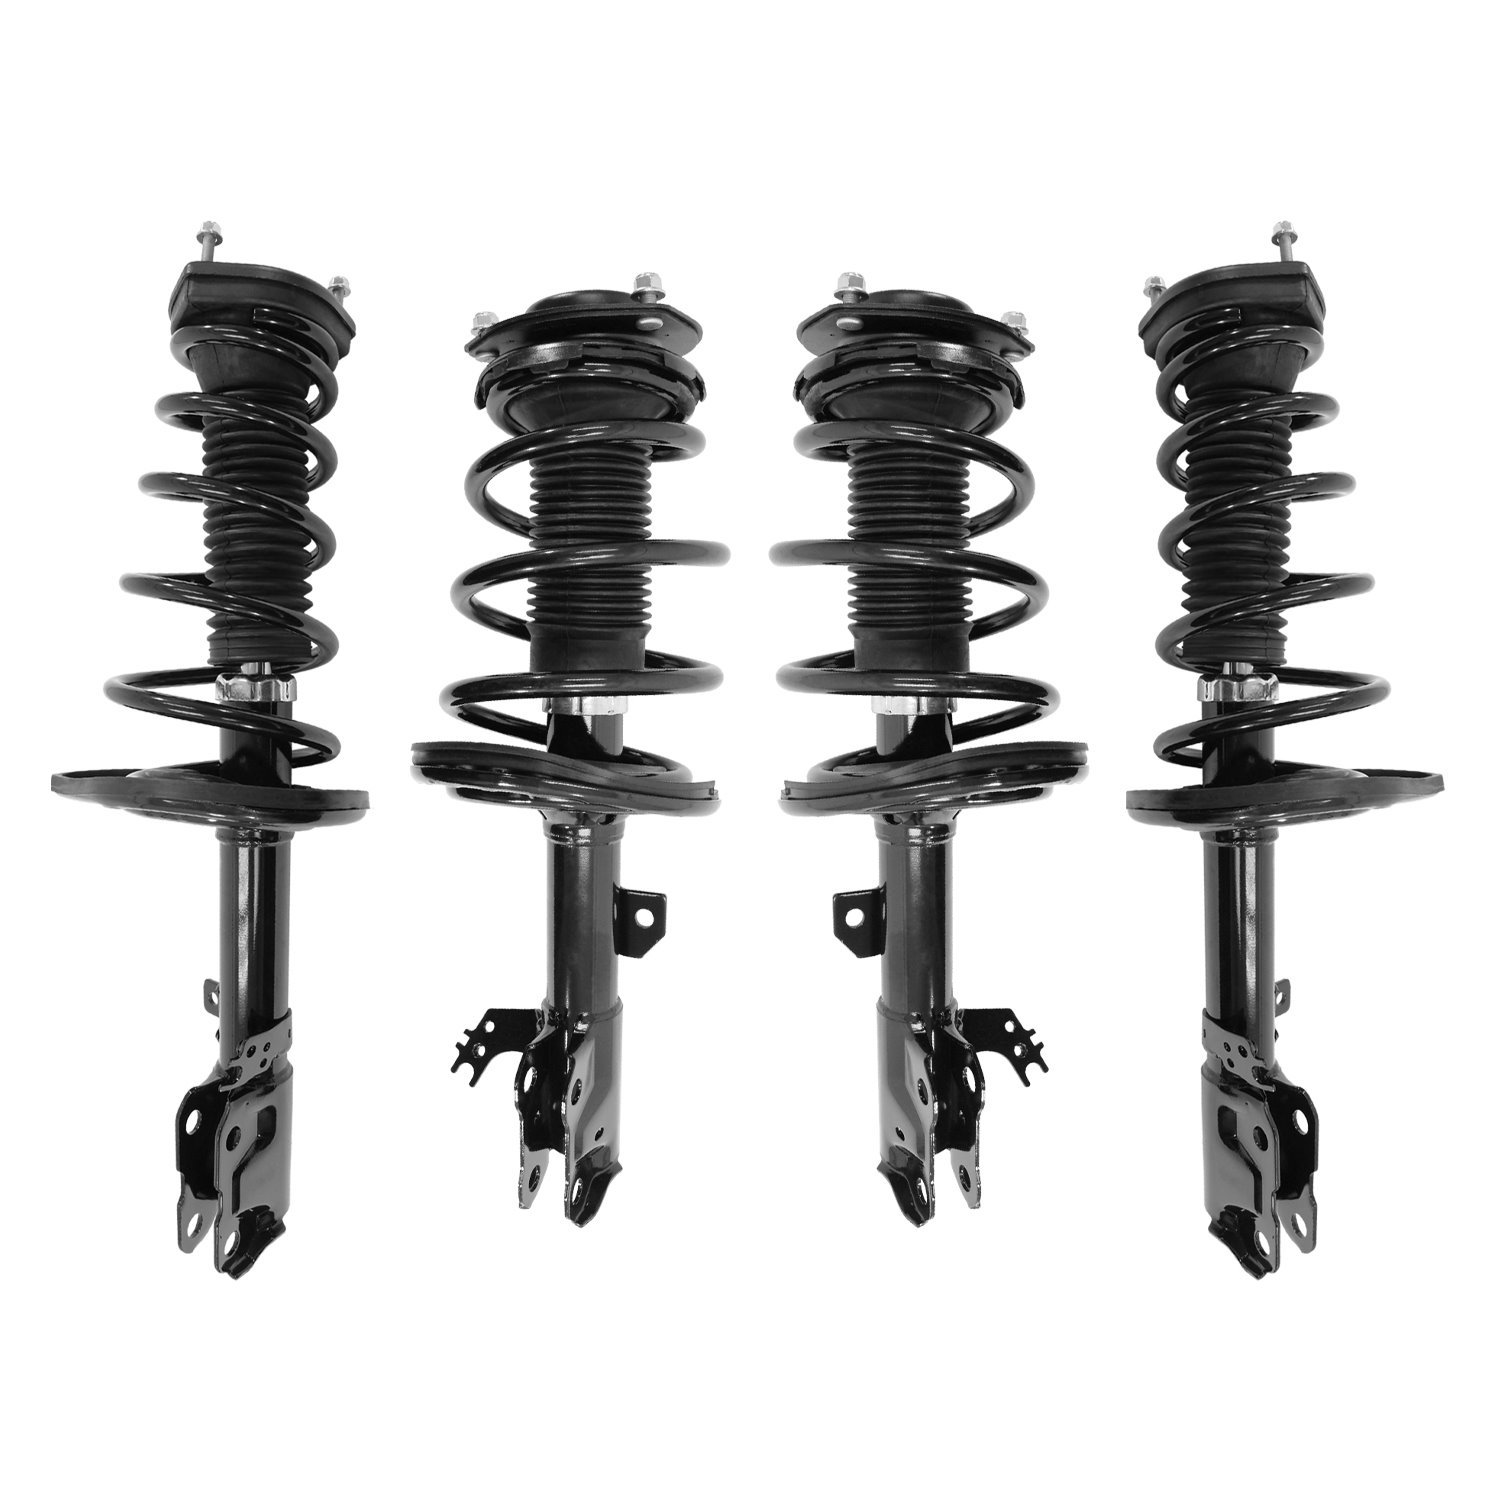 4-13281-16081-001 Front & Rear Suspension Strut & Coil Spring Assembly Kit Fits Select Toyota Avalon